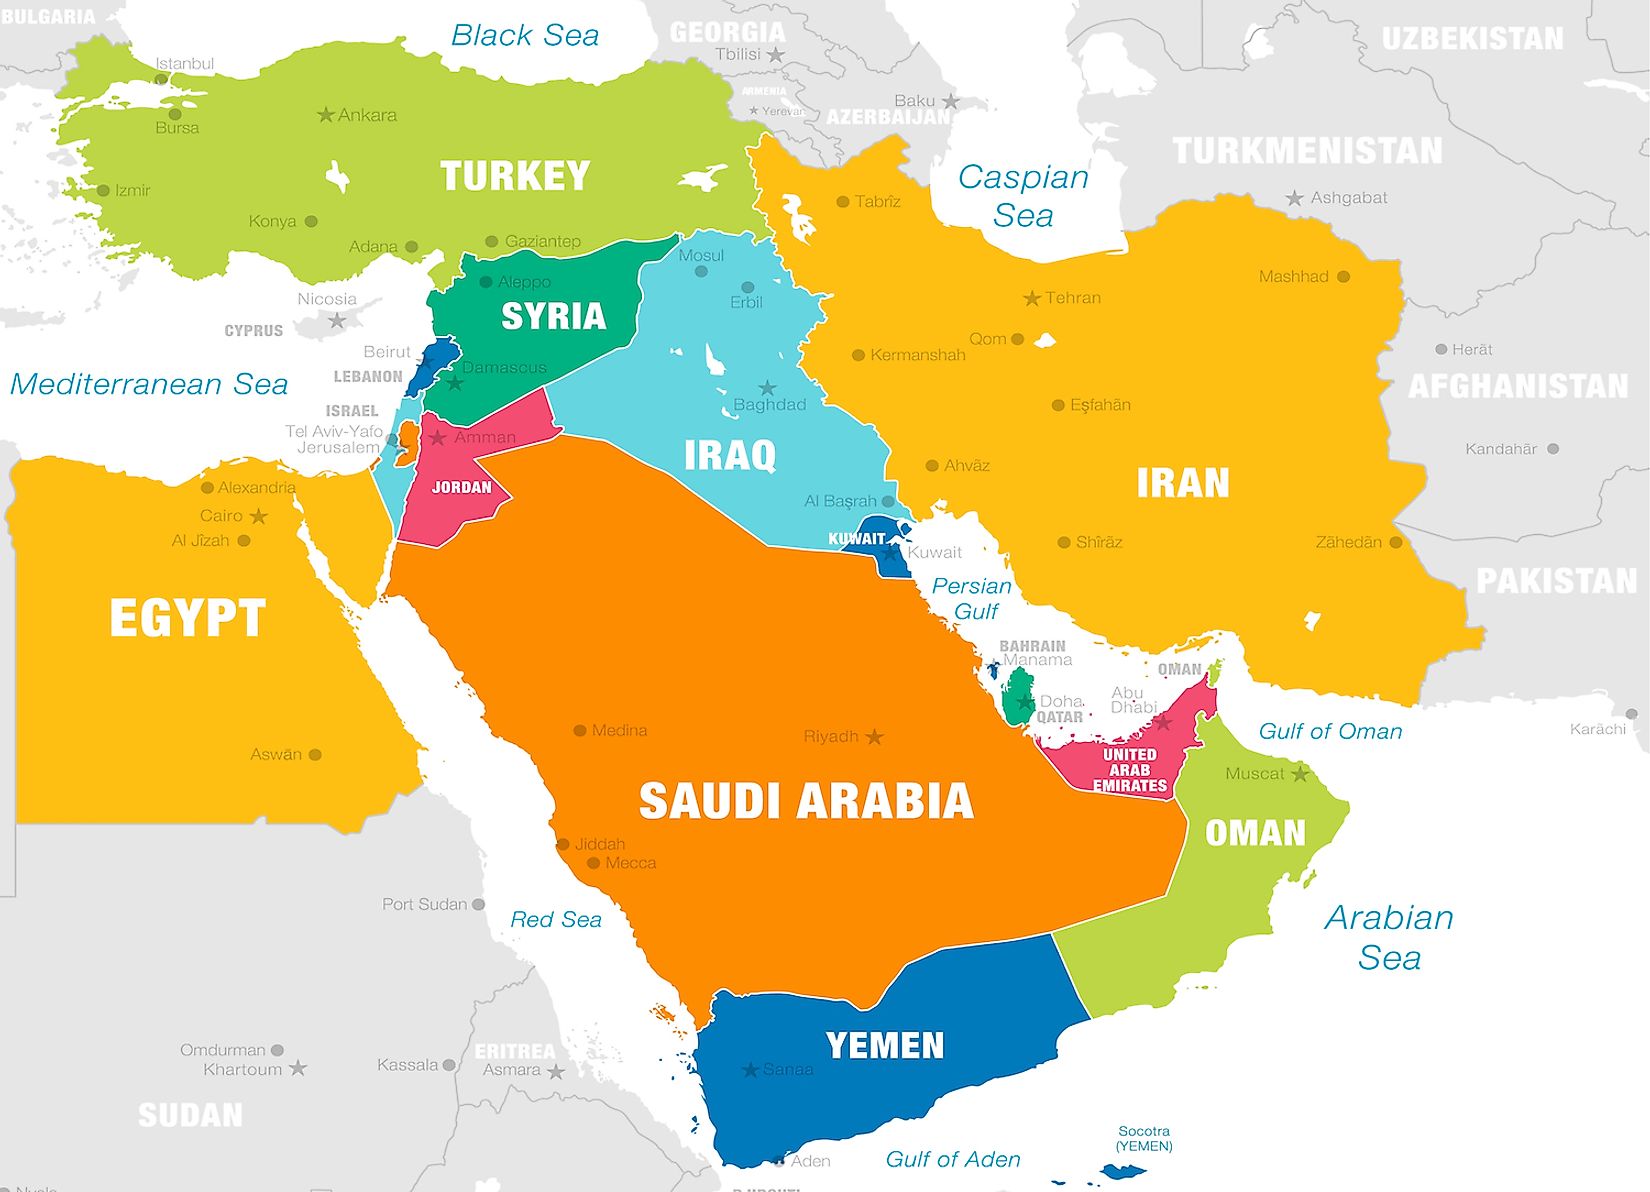 middle eastern countries map quiz